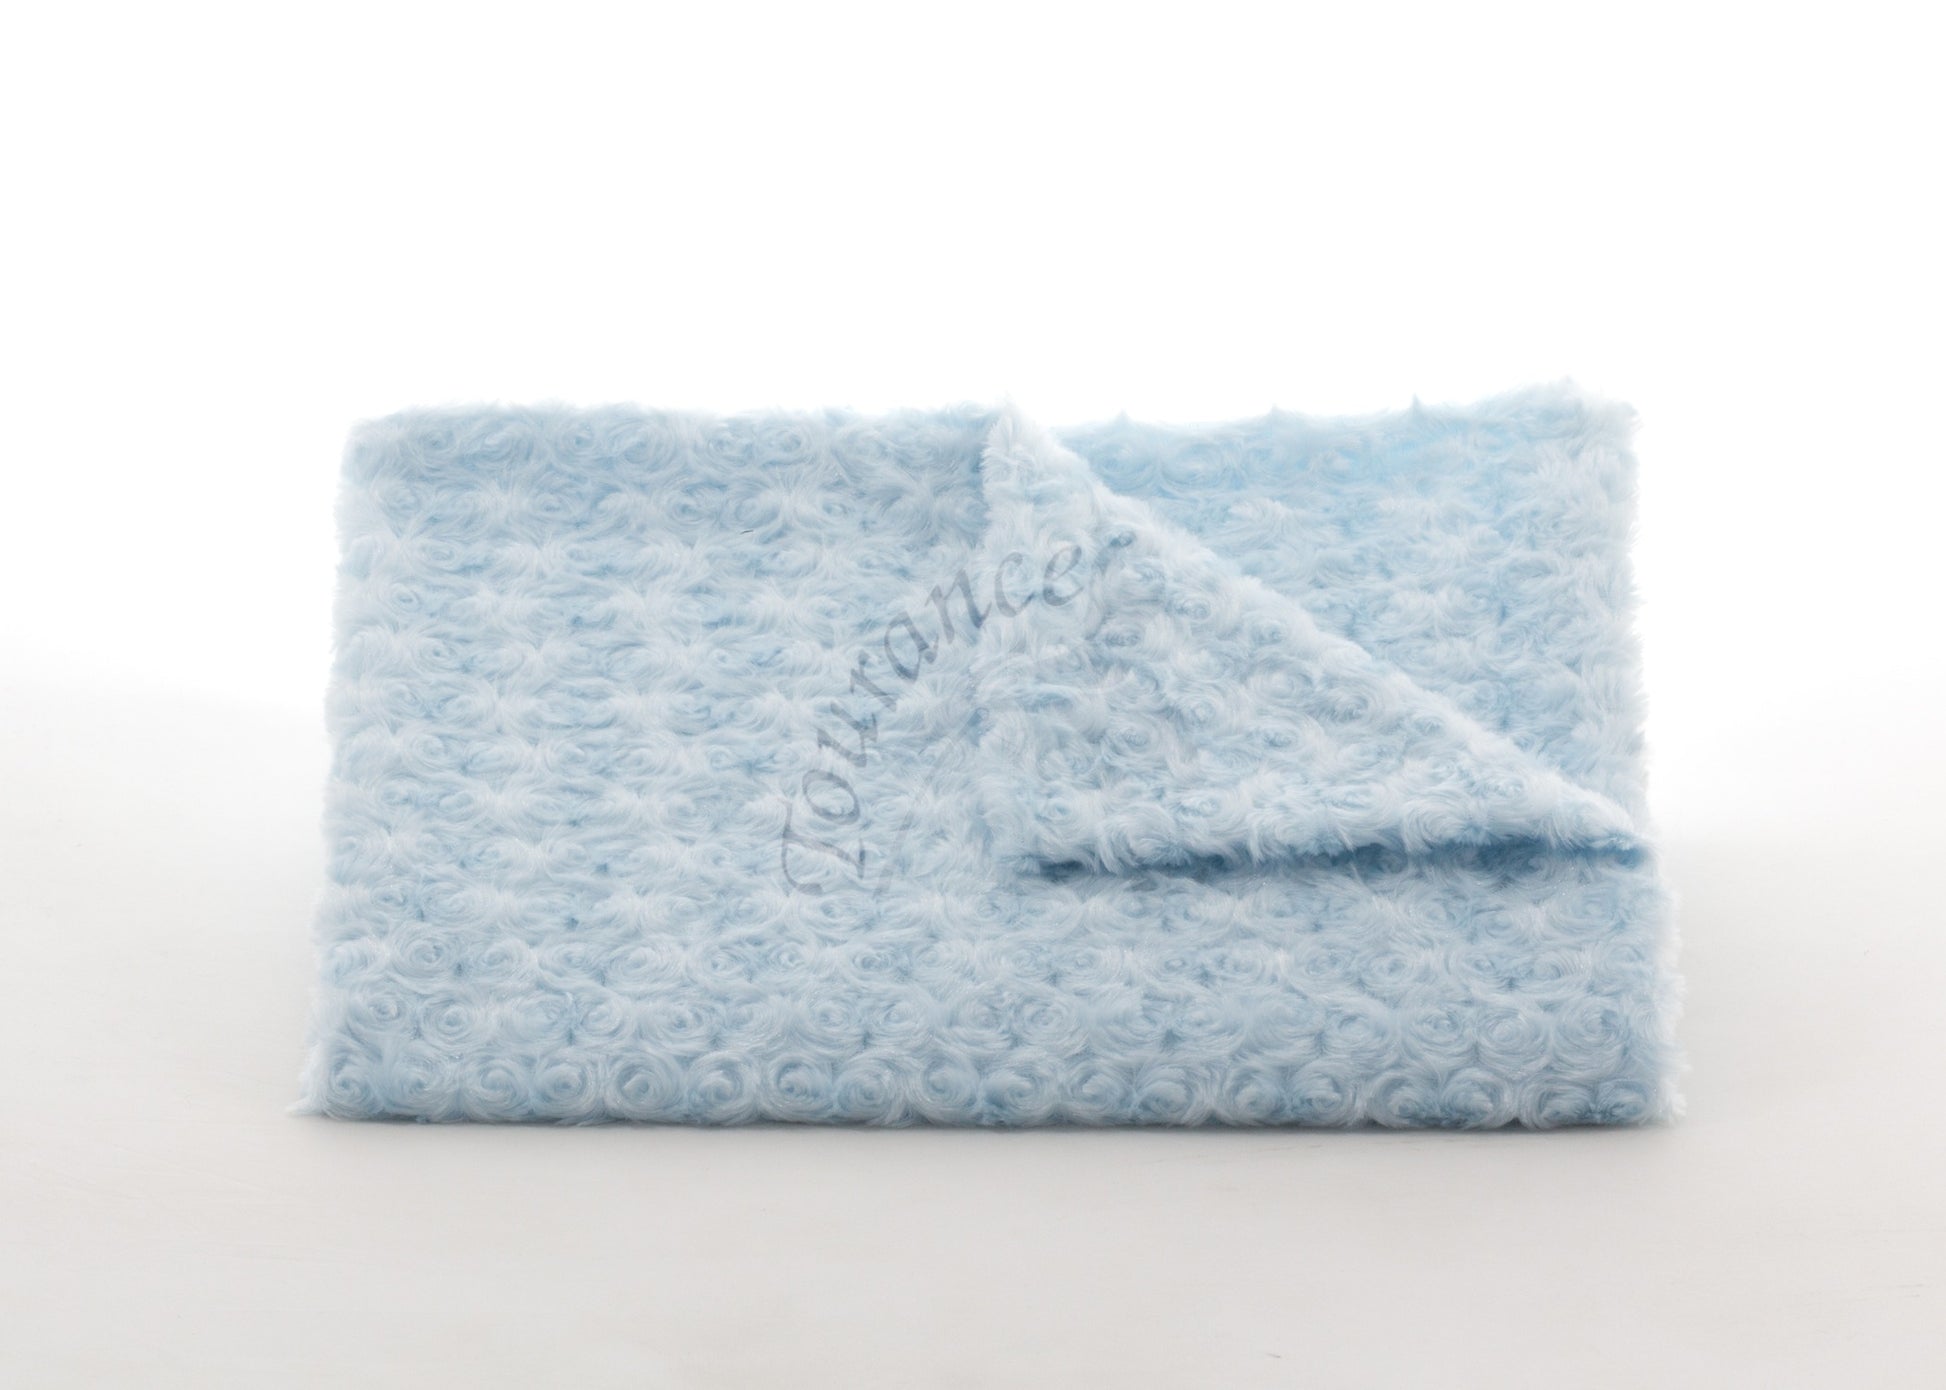 Rosebud Classic Baby Blanket in Blue with Tourance watermark